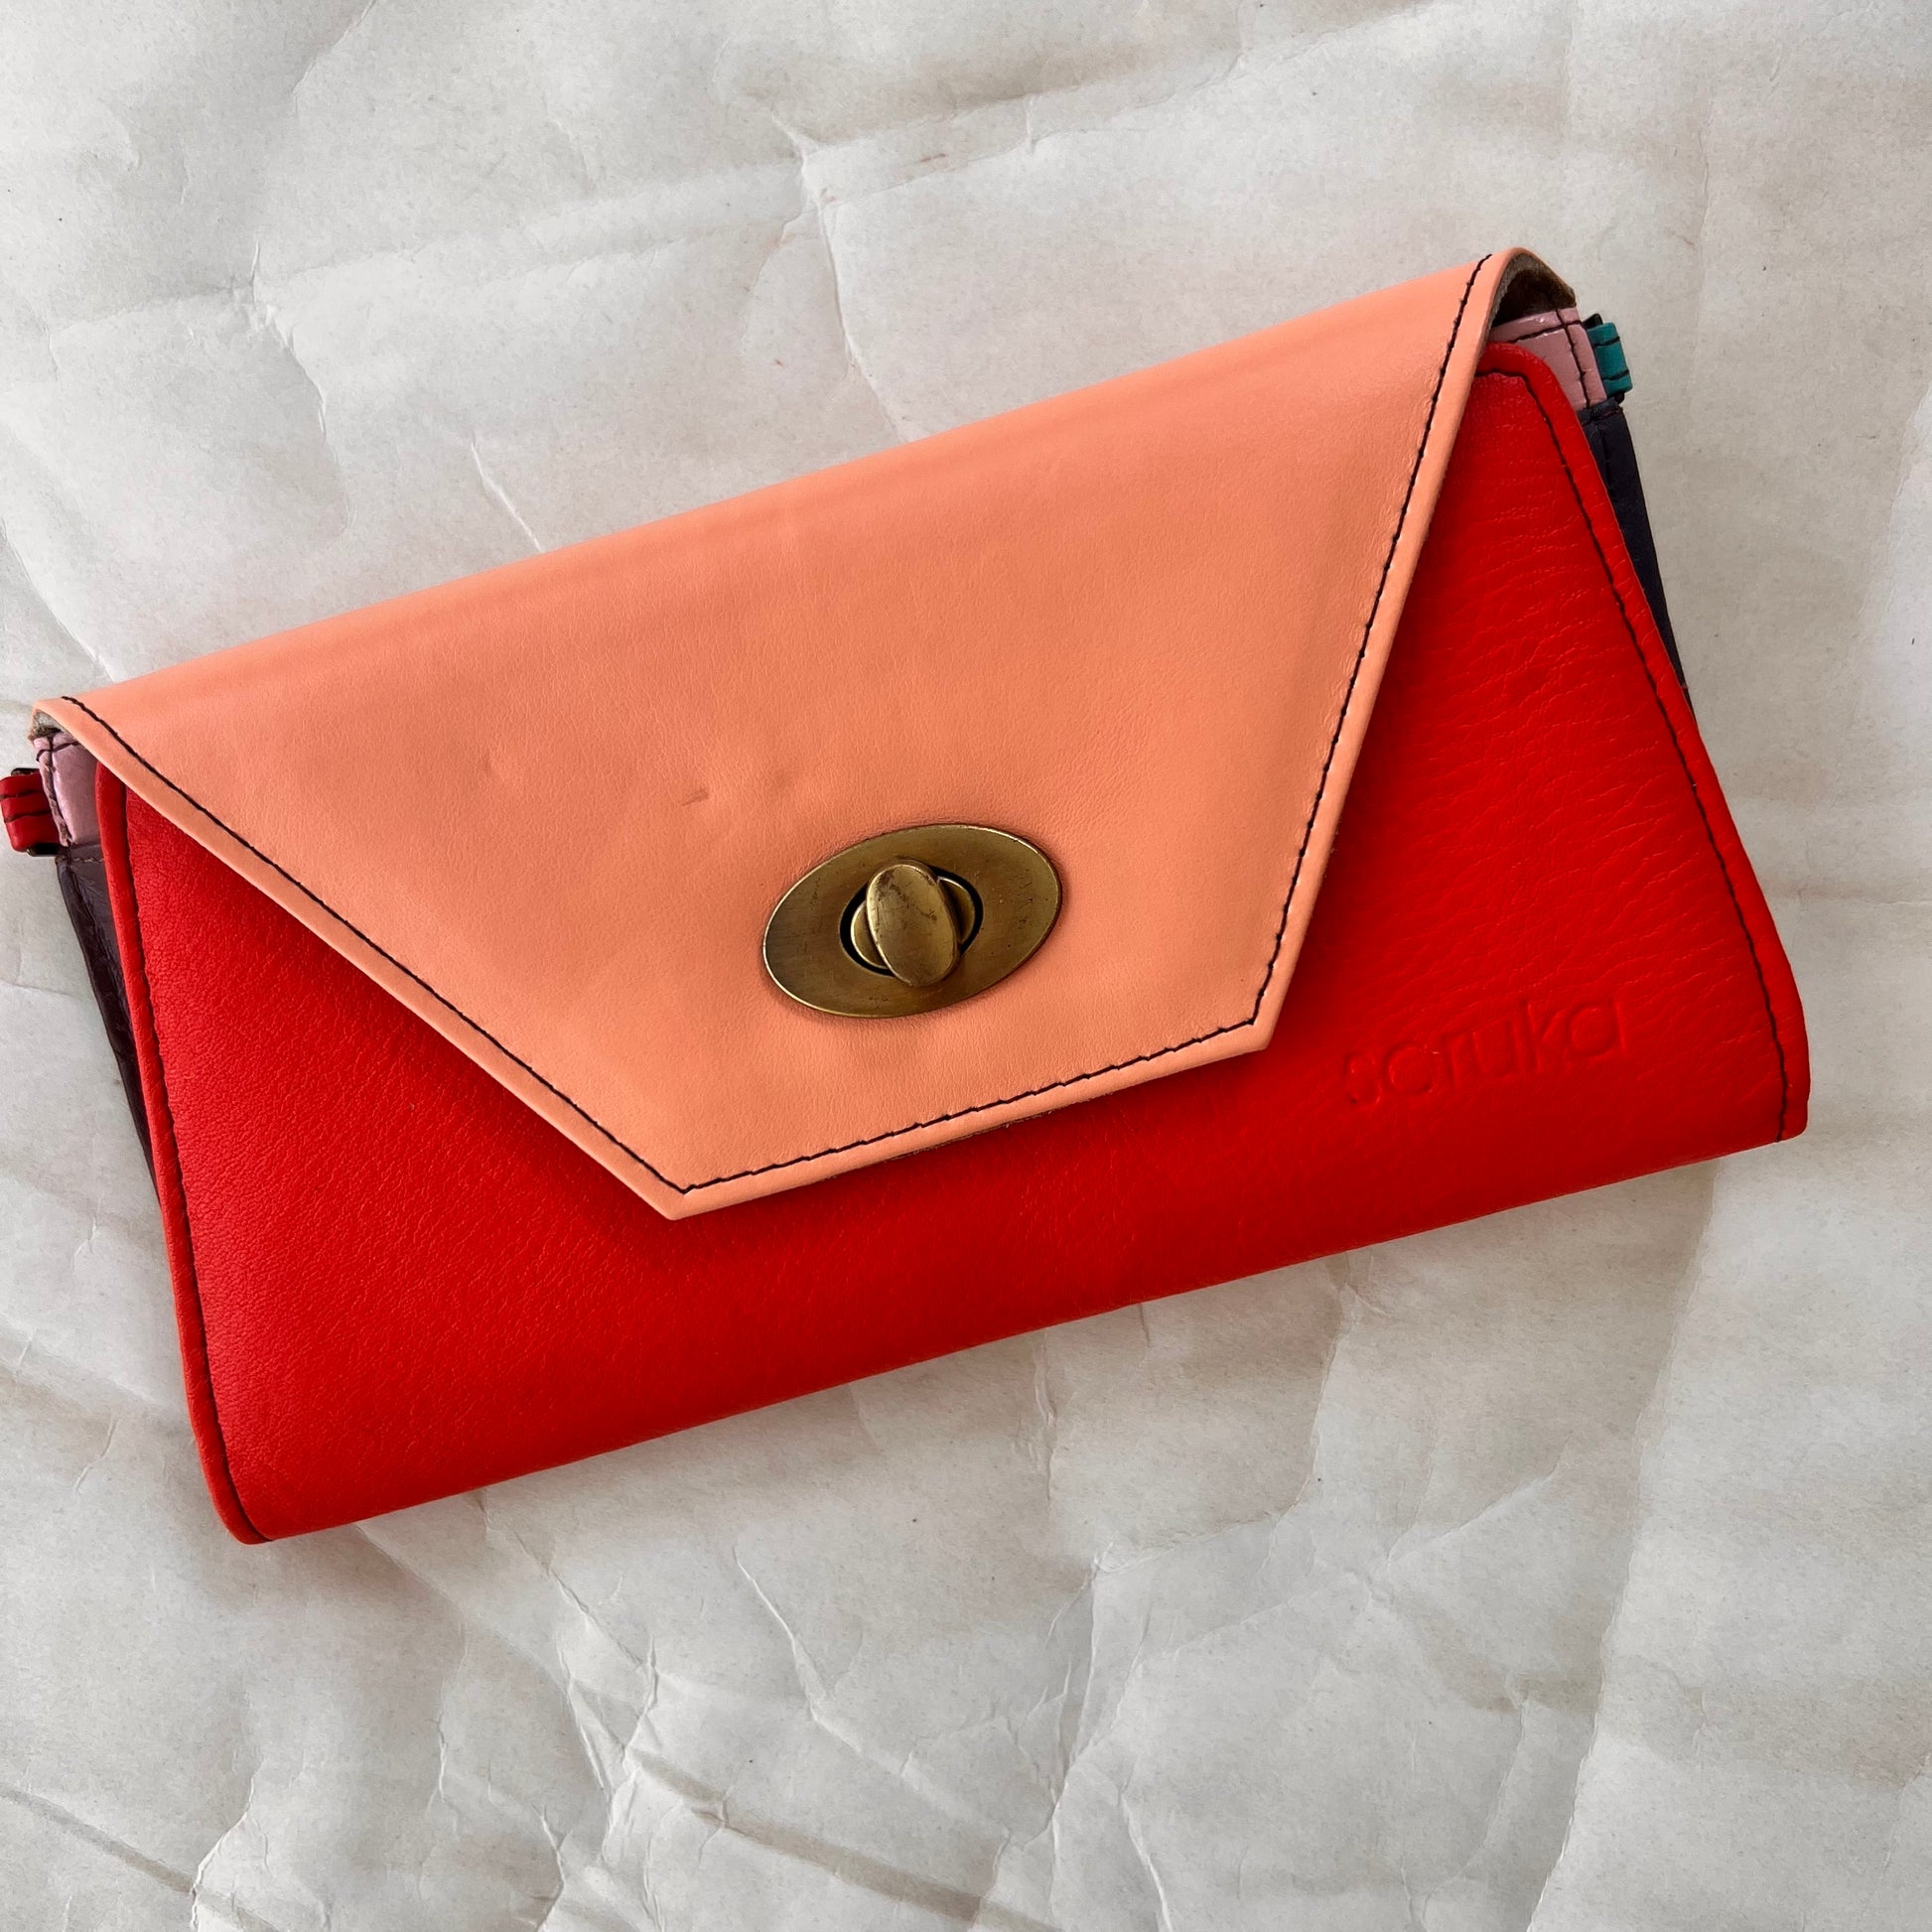 red secret clutch wallet with pink flap.